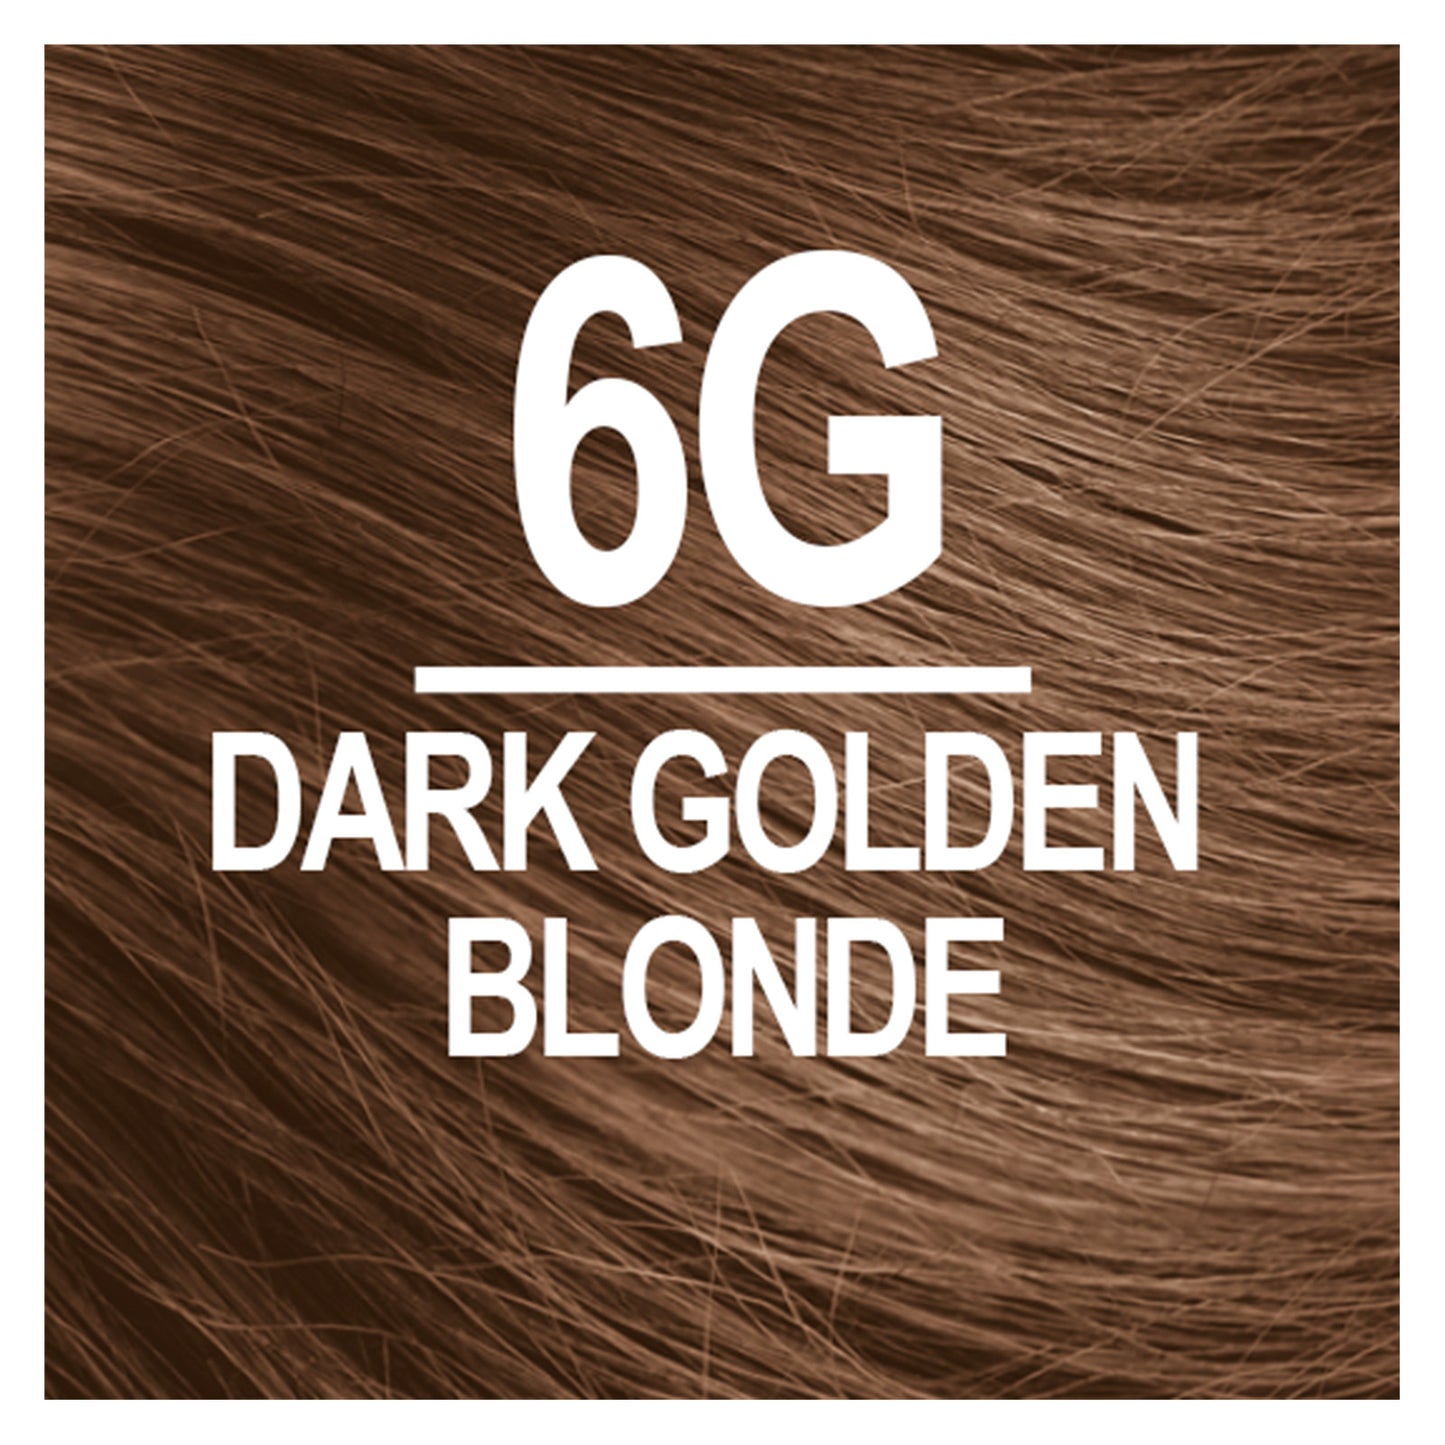 Naturtint Permanent Hair Color 6G Dark Golden Blonde (Packaging may vary)